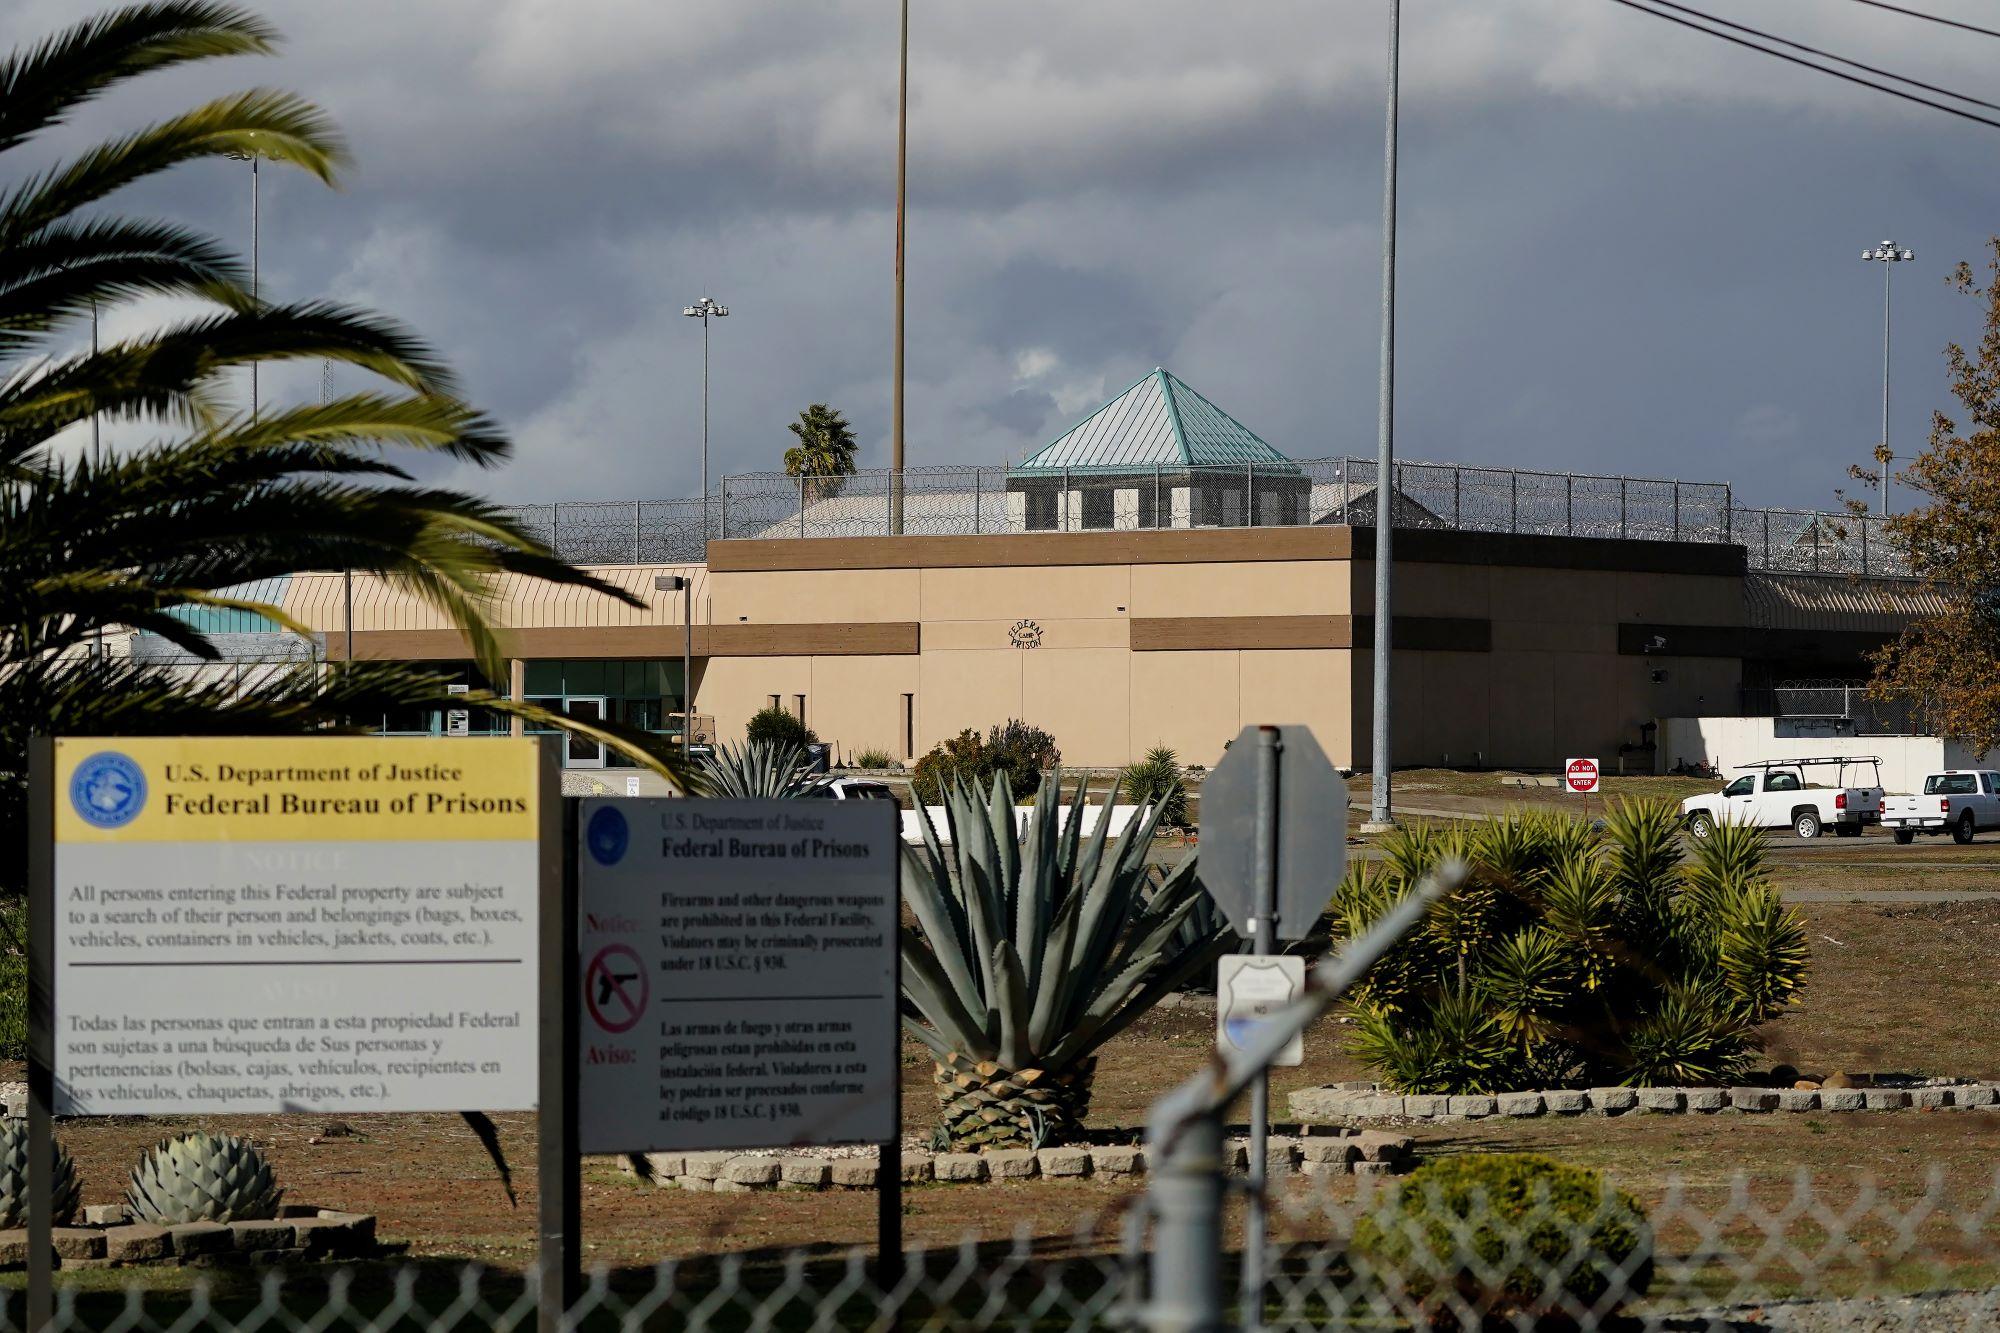 7th Guard Sentenced for Sexually Abusing Inmates at California’s ‘Rape Club’ Prison